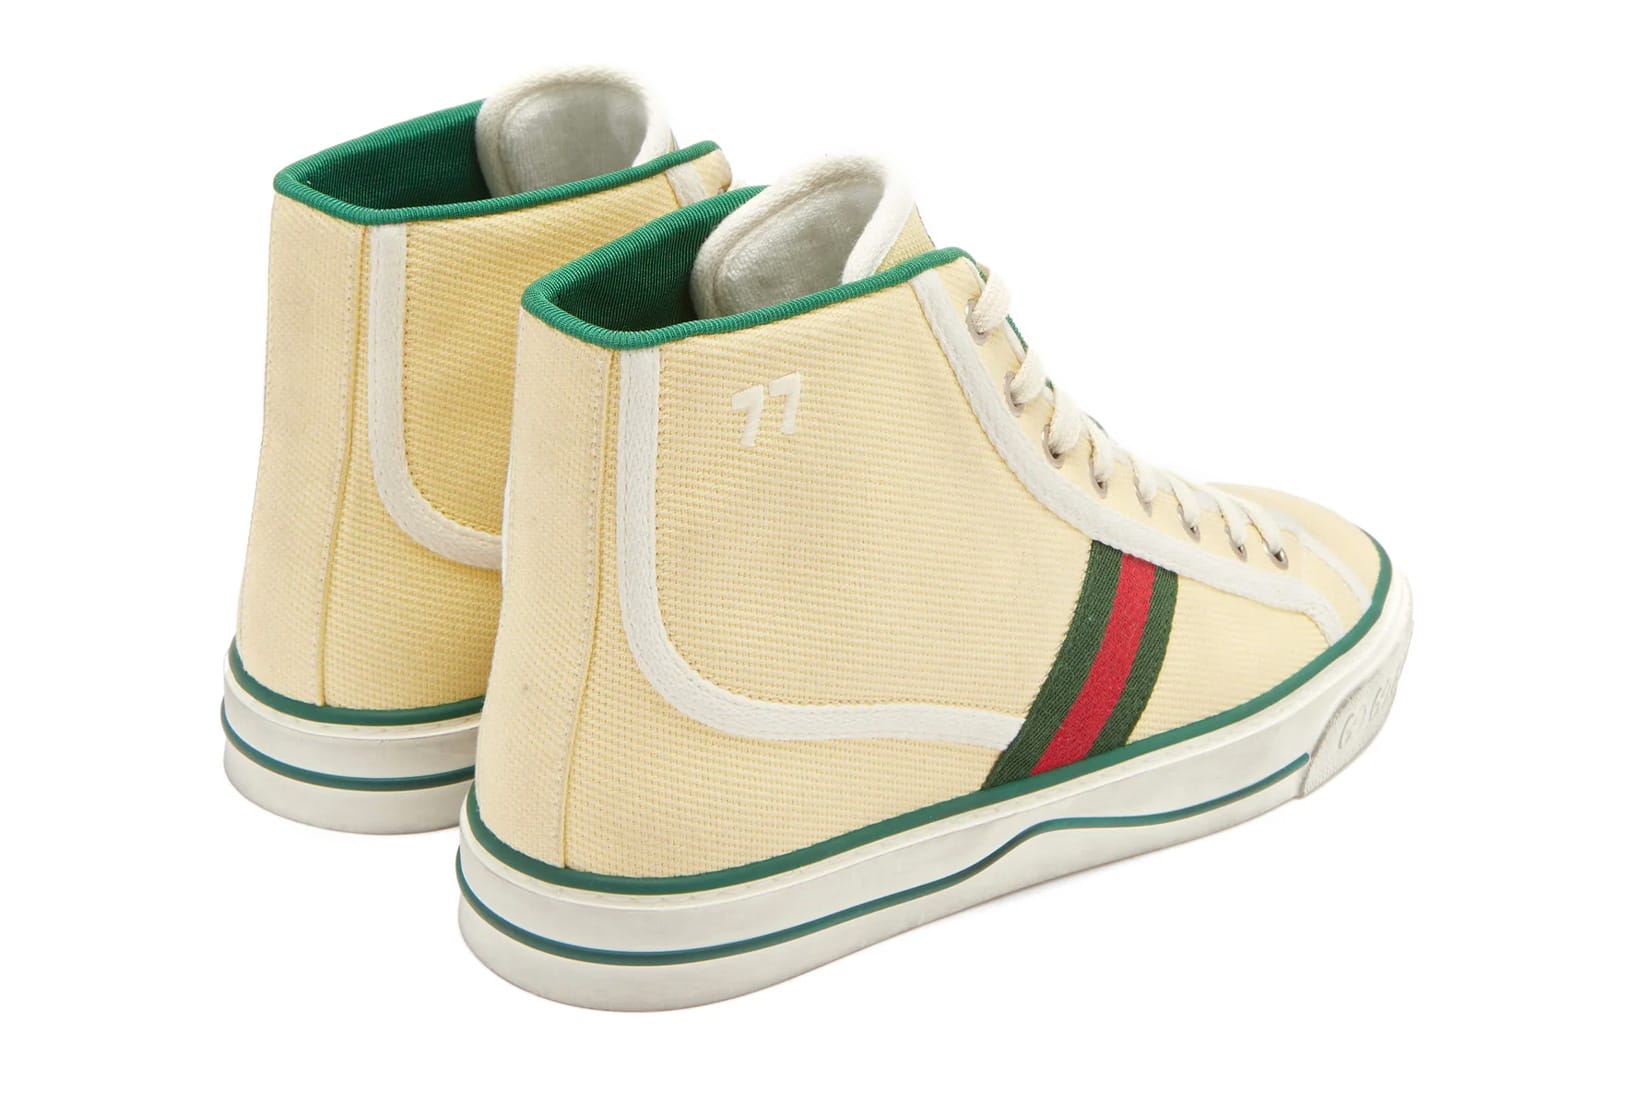 sneakers with green and red stripes